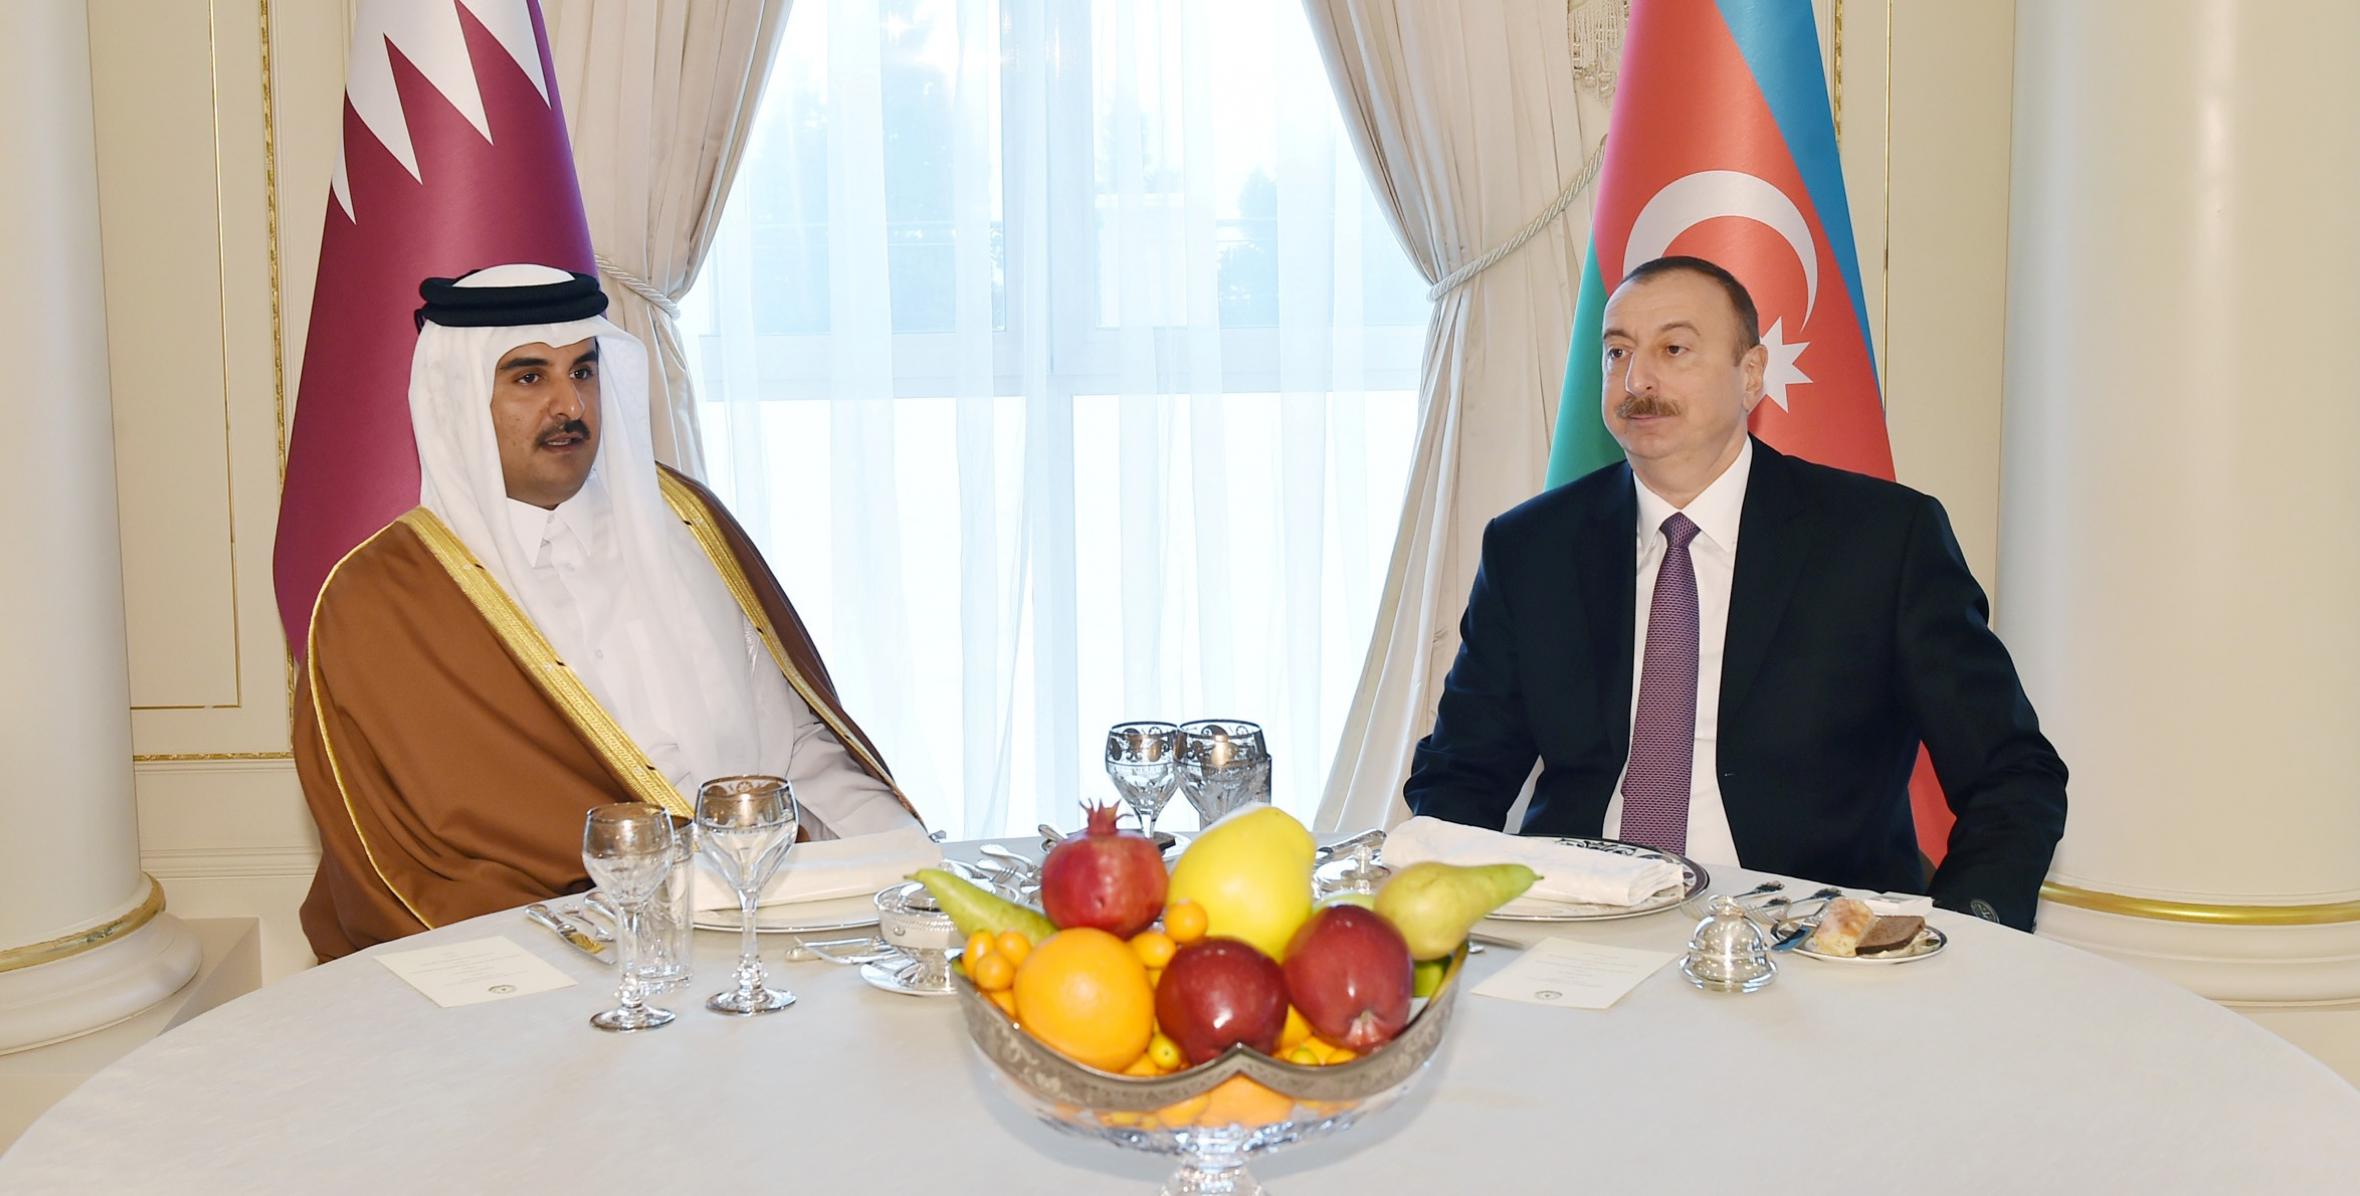 Ilham Aliyev hosted a dinner reception in honor of the Emir of Qatar